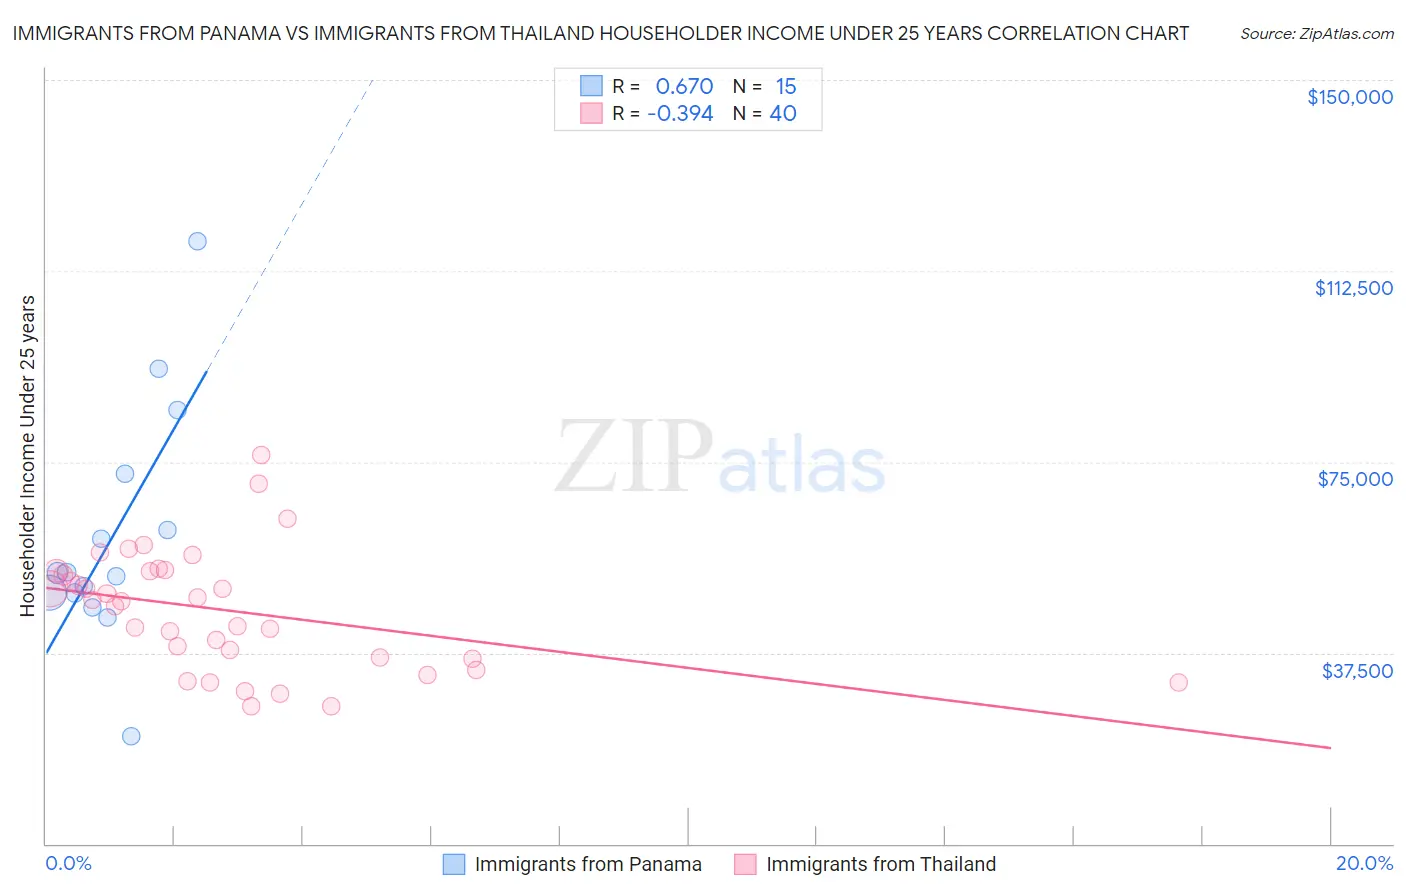 Immigrants from Panama vs Immigrants from Thailand Householder Income Under 25 years